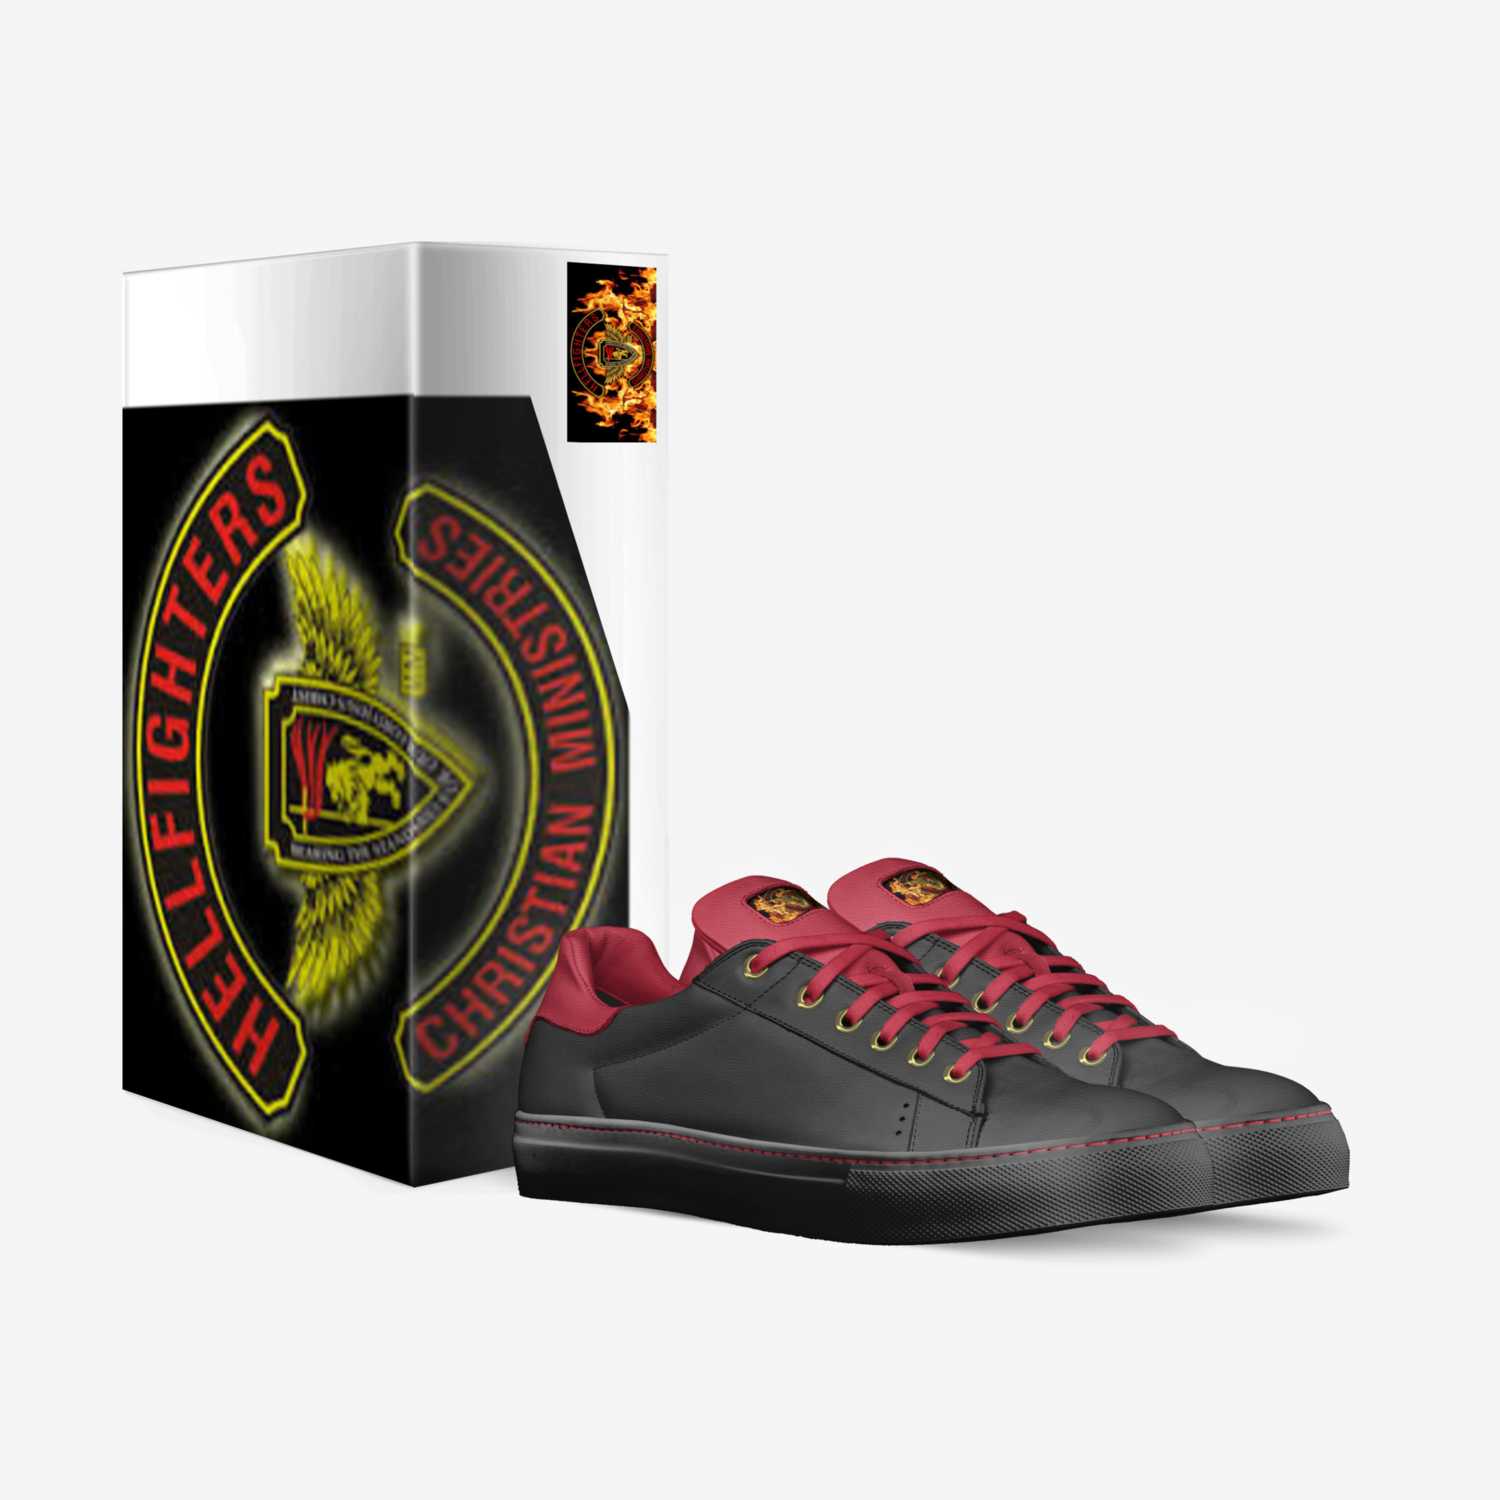 Hellfighters custom made in Italy shoes by Michelle Ayala | Box view